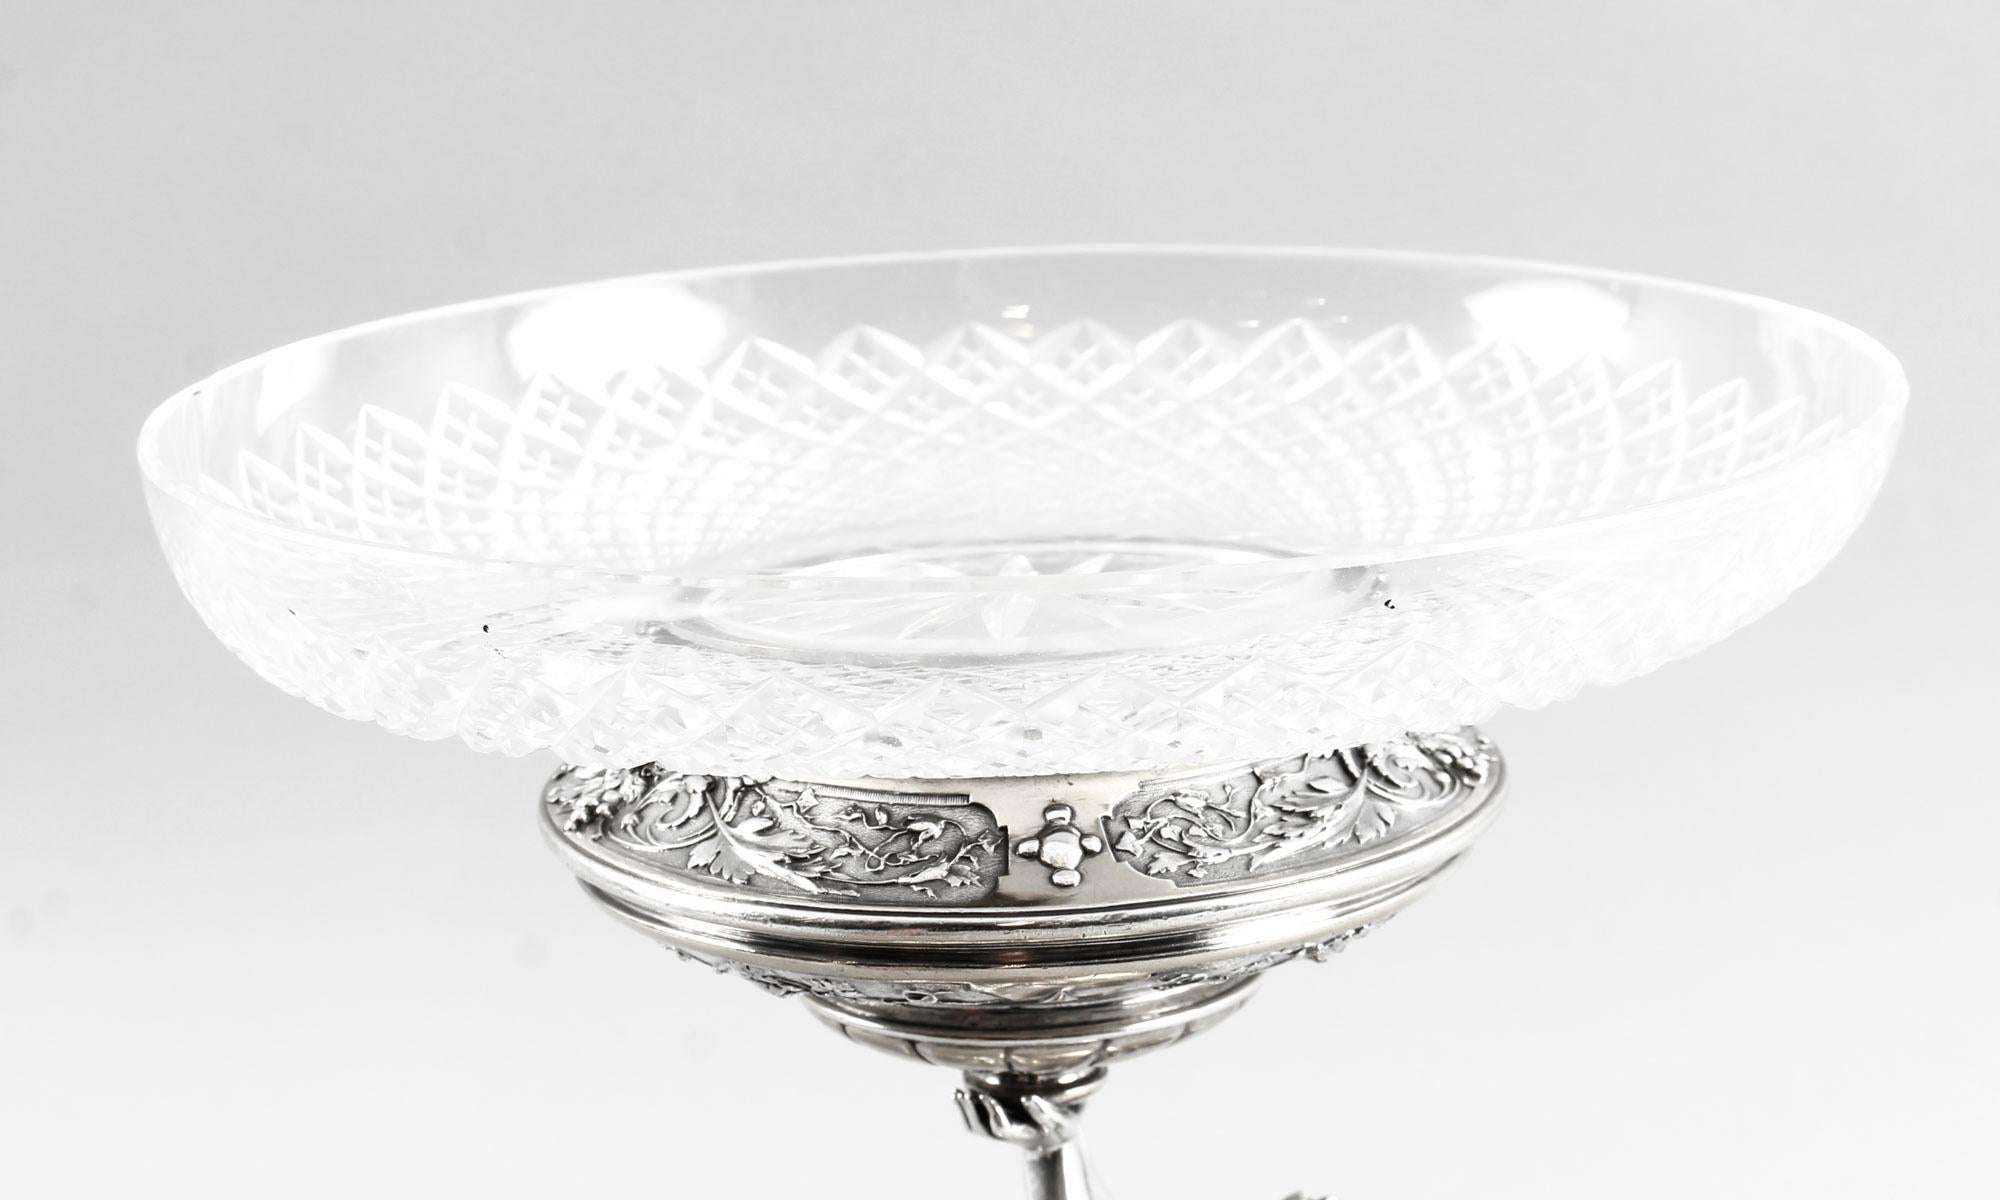 Late 19th Century English Victorian Silver Plate & Cut Glass Centrepieces 1883, 19th Century, Pair